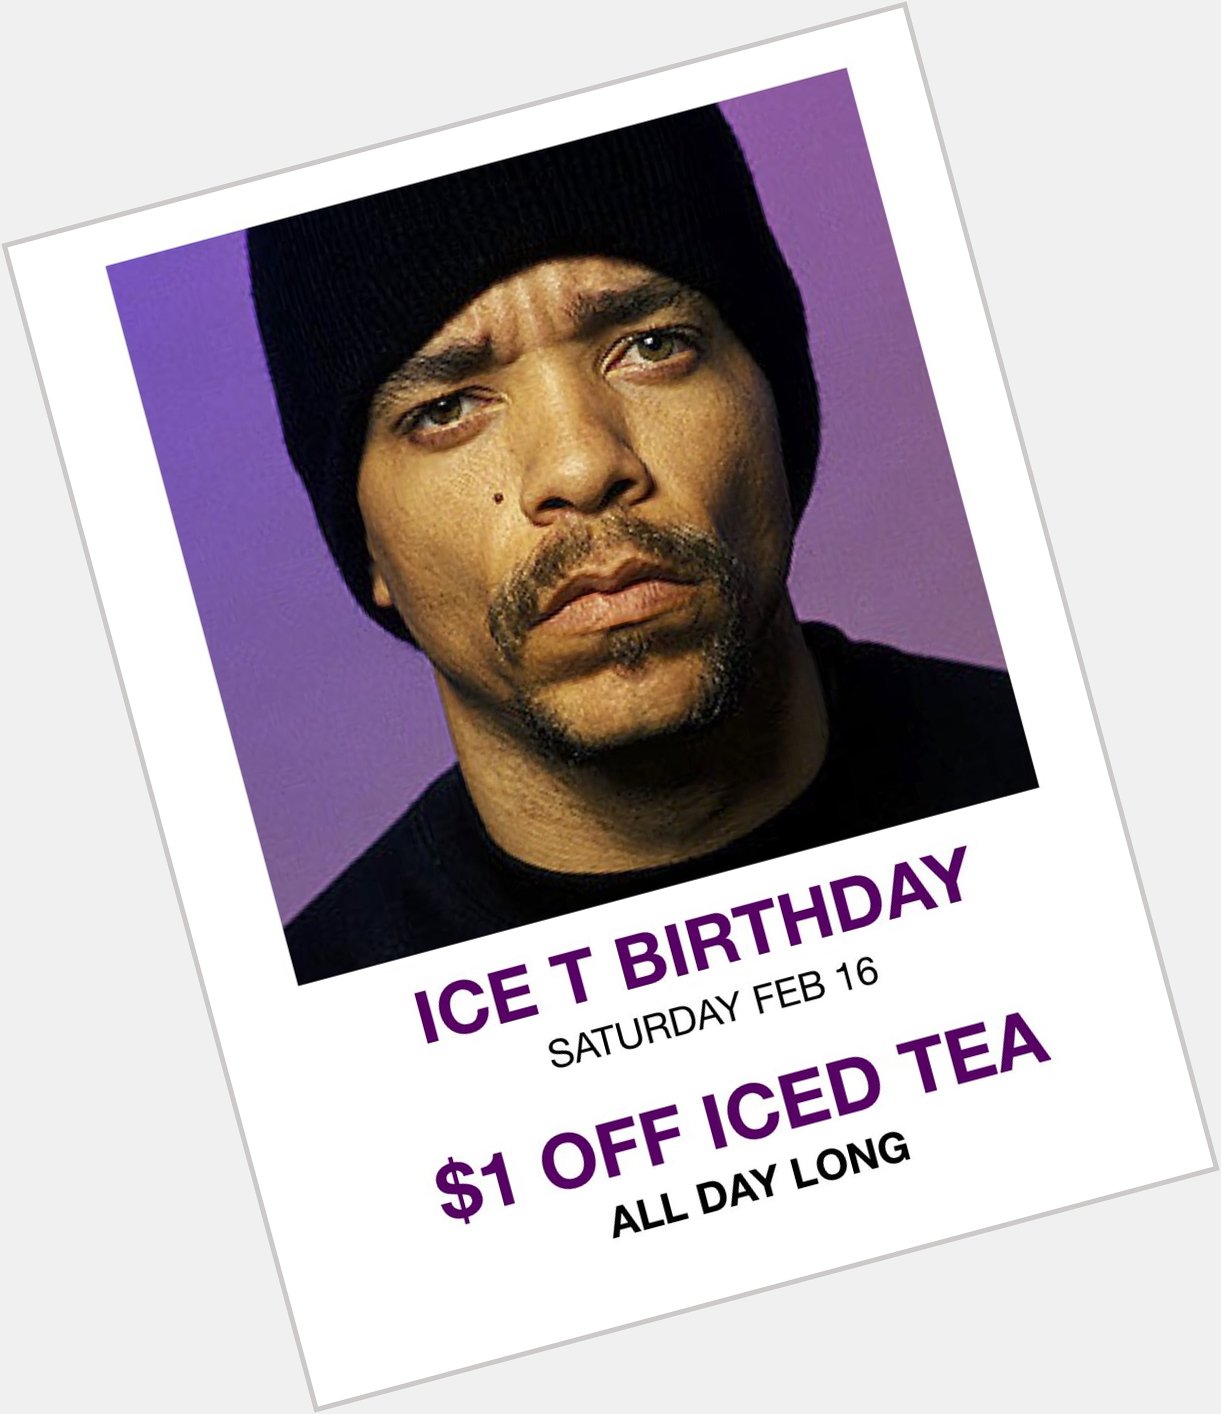 Happy Birthday Ice T! Enjoy this special ALL DAY LONG in his honor! 